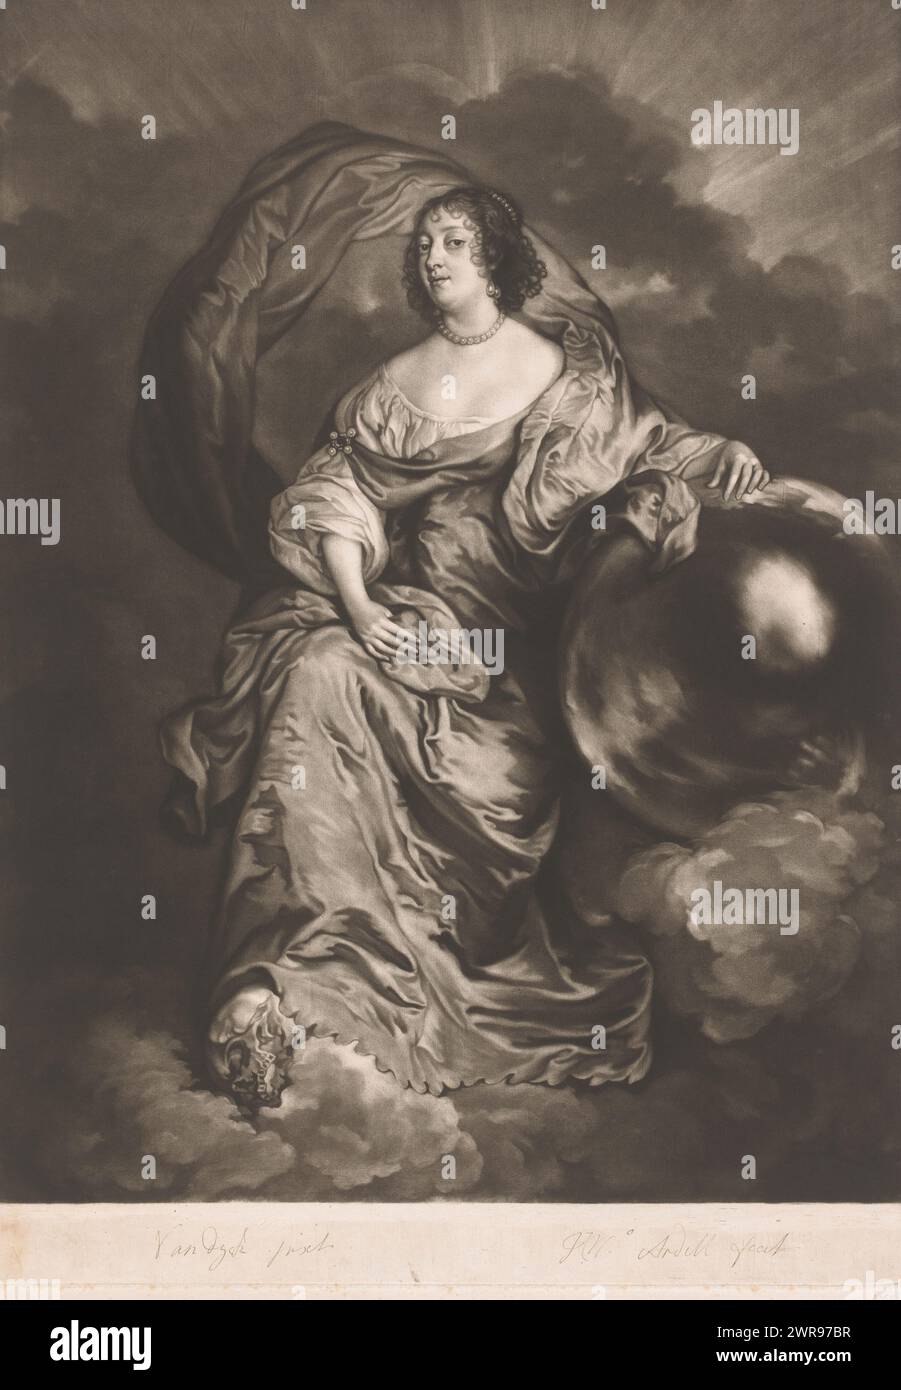 Portrait of Rachel Wriothesley, print maker: James McArdell, after painting by: Anthony van Dyck, London, 1758, paper, height 500 mm × width 352 mm, print Stock Photo